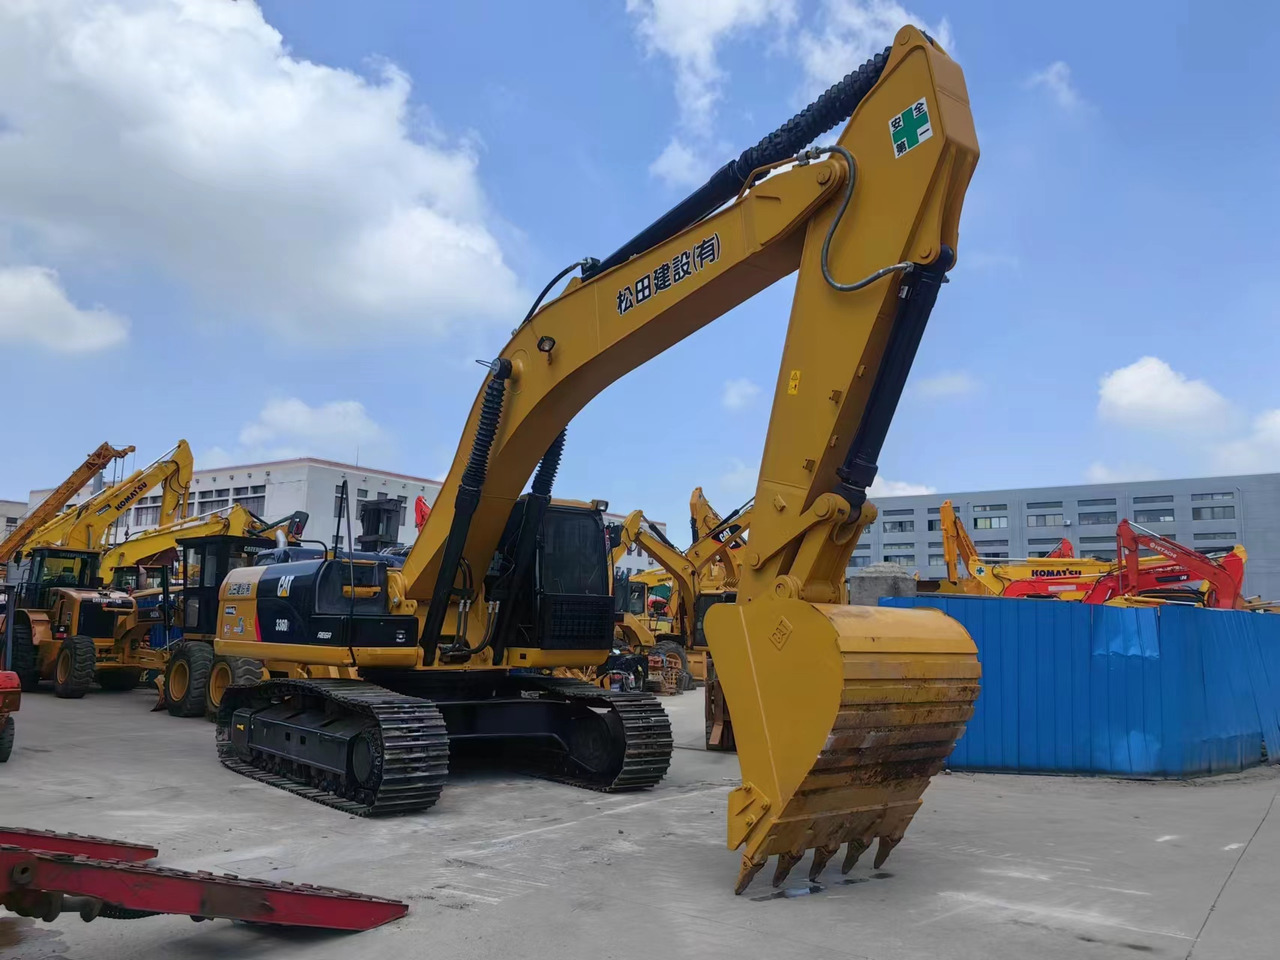 Crawler excavator 95%new Original Japan made CATERPILLAR Cat 336D2, Large engineering construction machinery good condition in stock hot selling !!!: picture 7